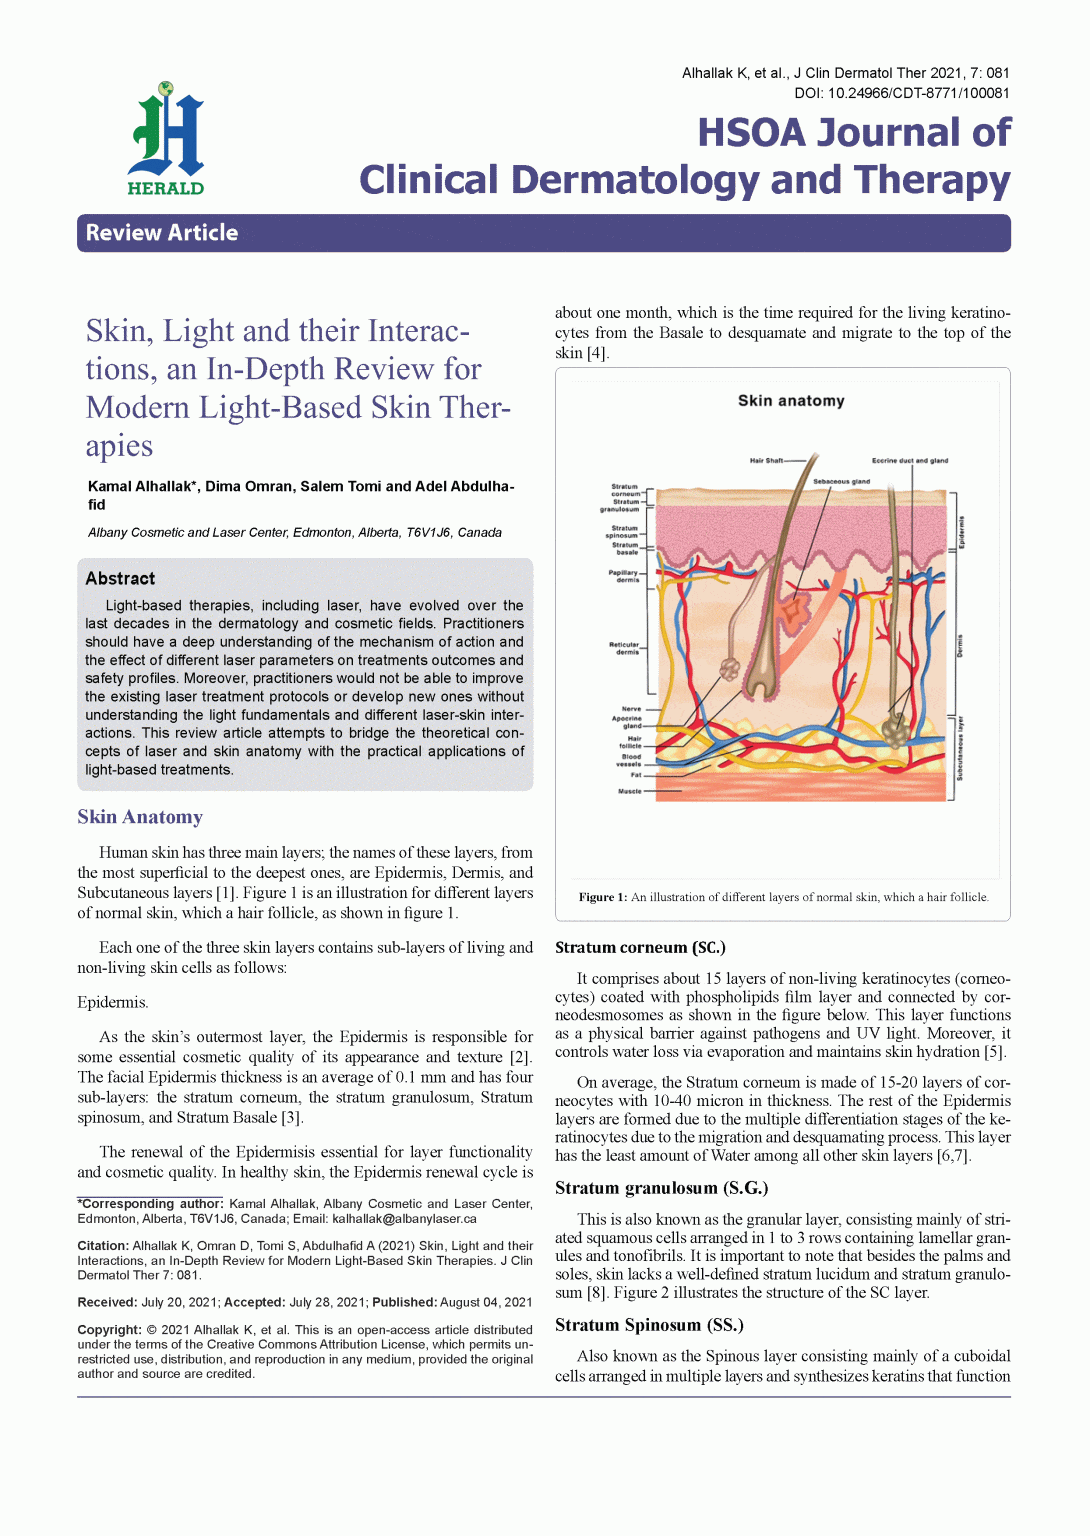 skin-light-and-their-interactions-an-in-depth-review-for-modern-light-based-skin-therapies-(1)_Page_02